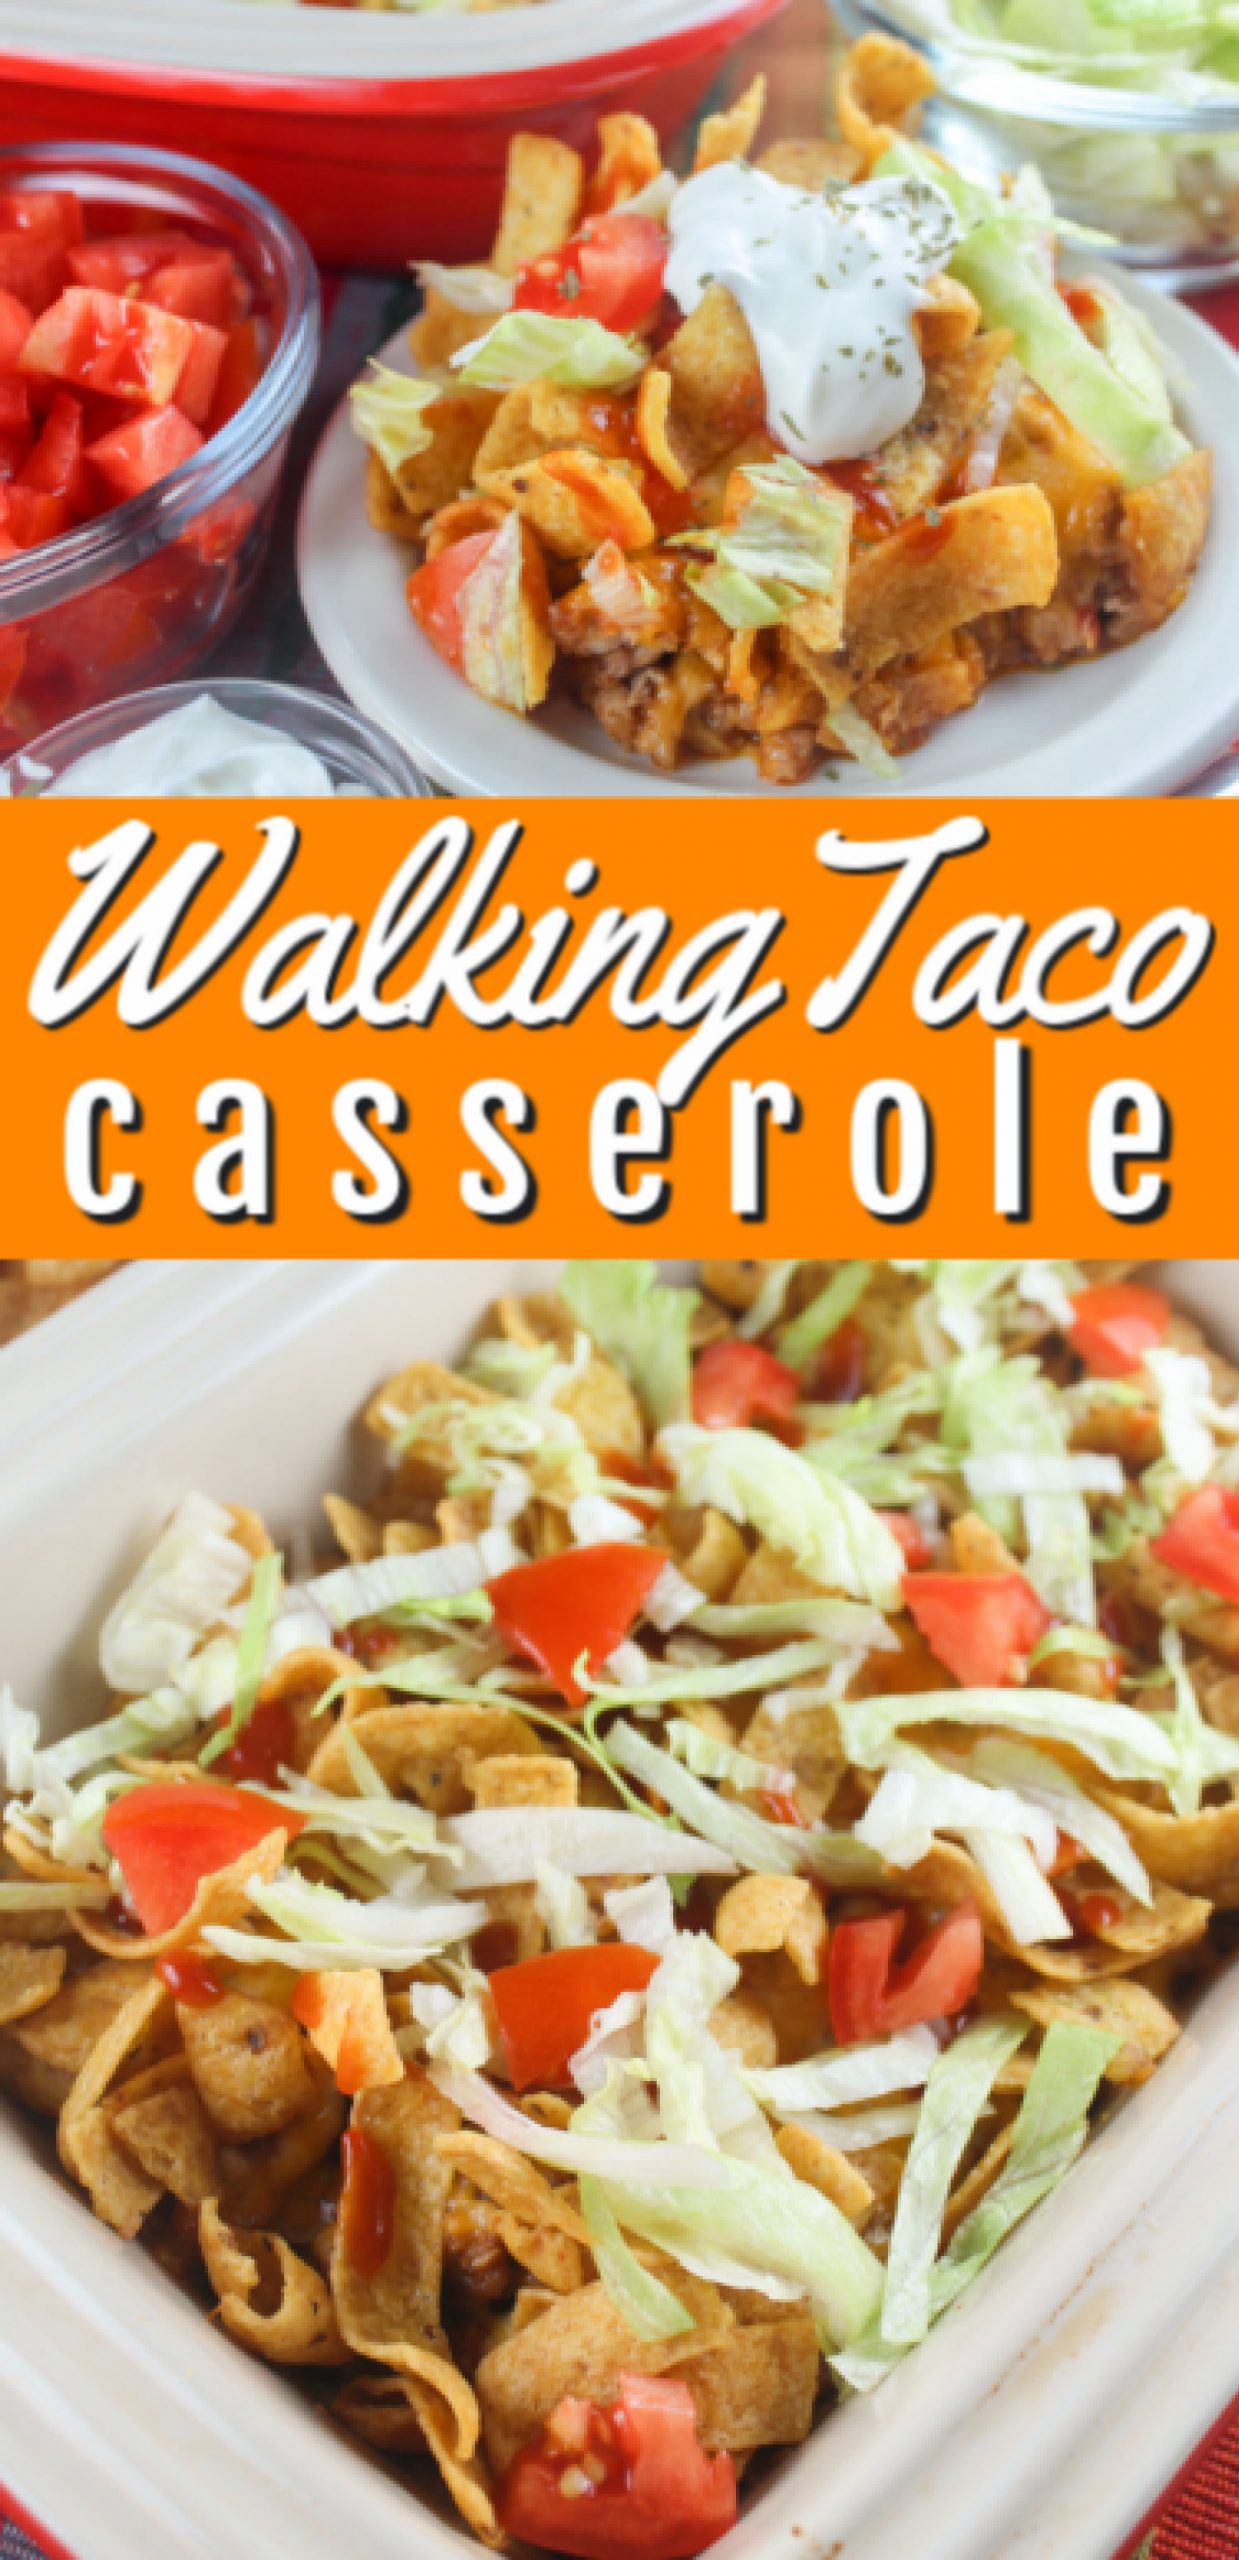 It's football season again and I still remember making Walking Tacos at the football game concession stand. But as a grown up - I don't need to hold a bag of chips for dinner so I made this delicious Walking Taco Casserole!  via @foodhussy